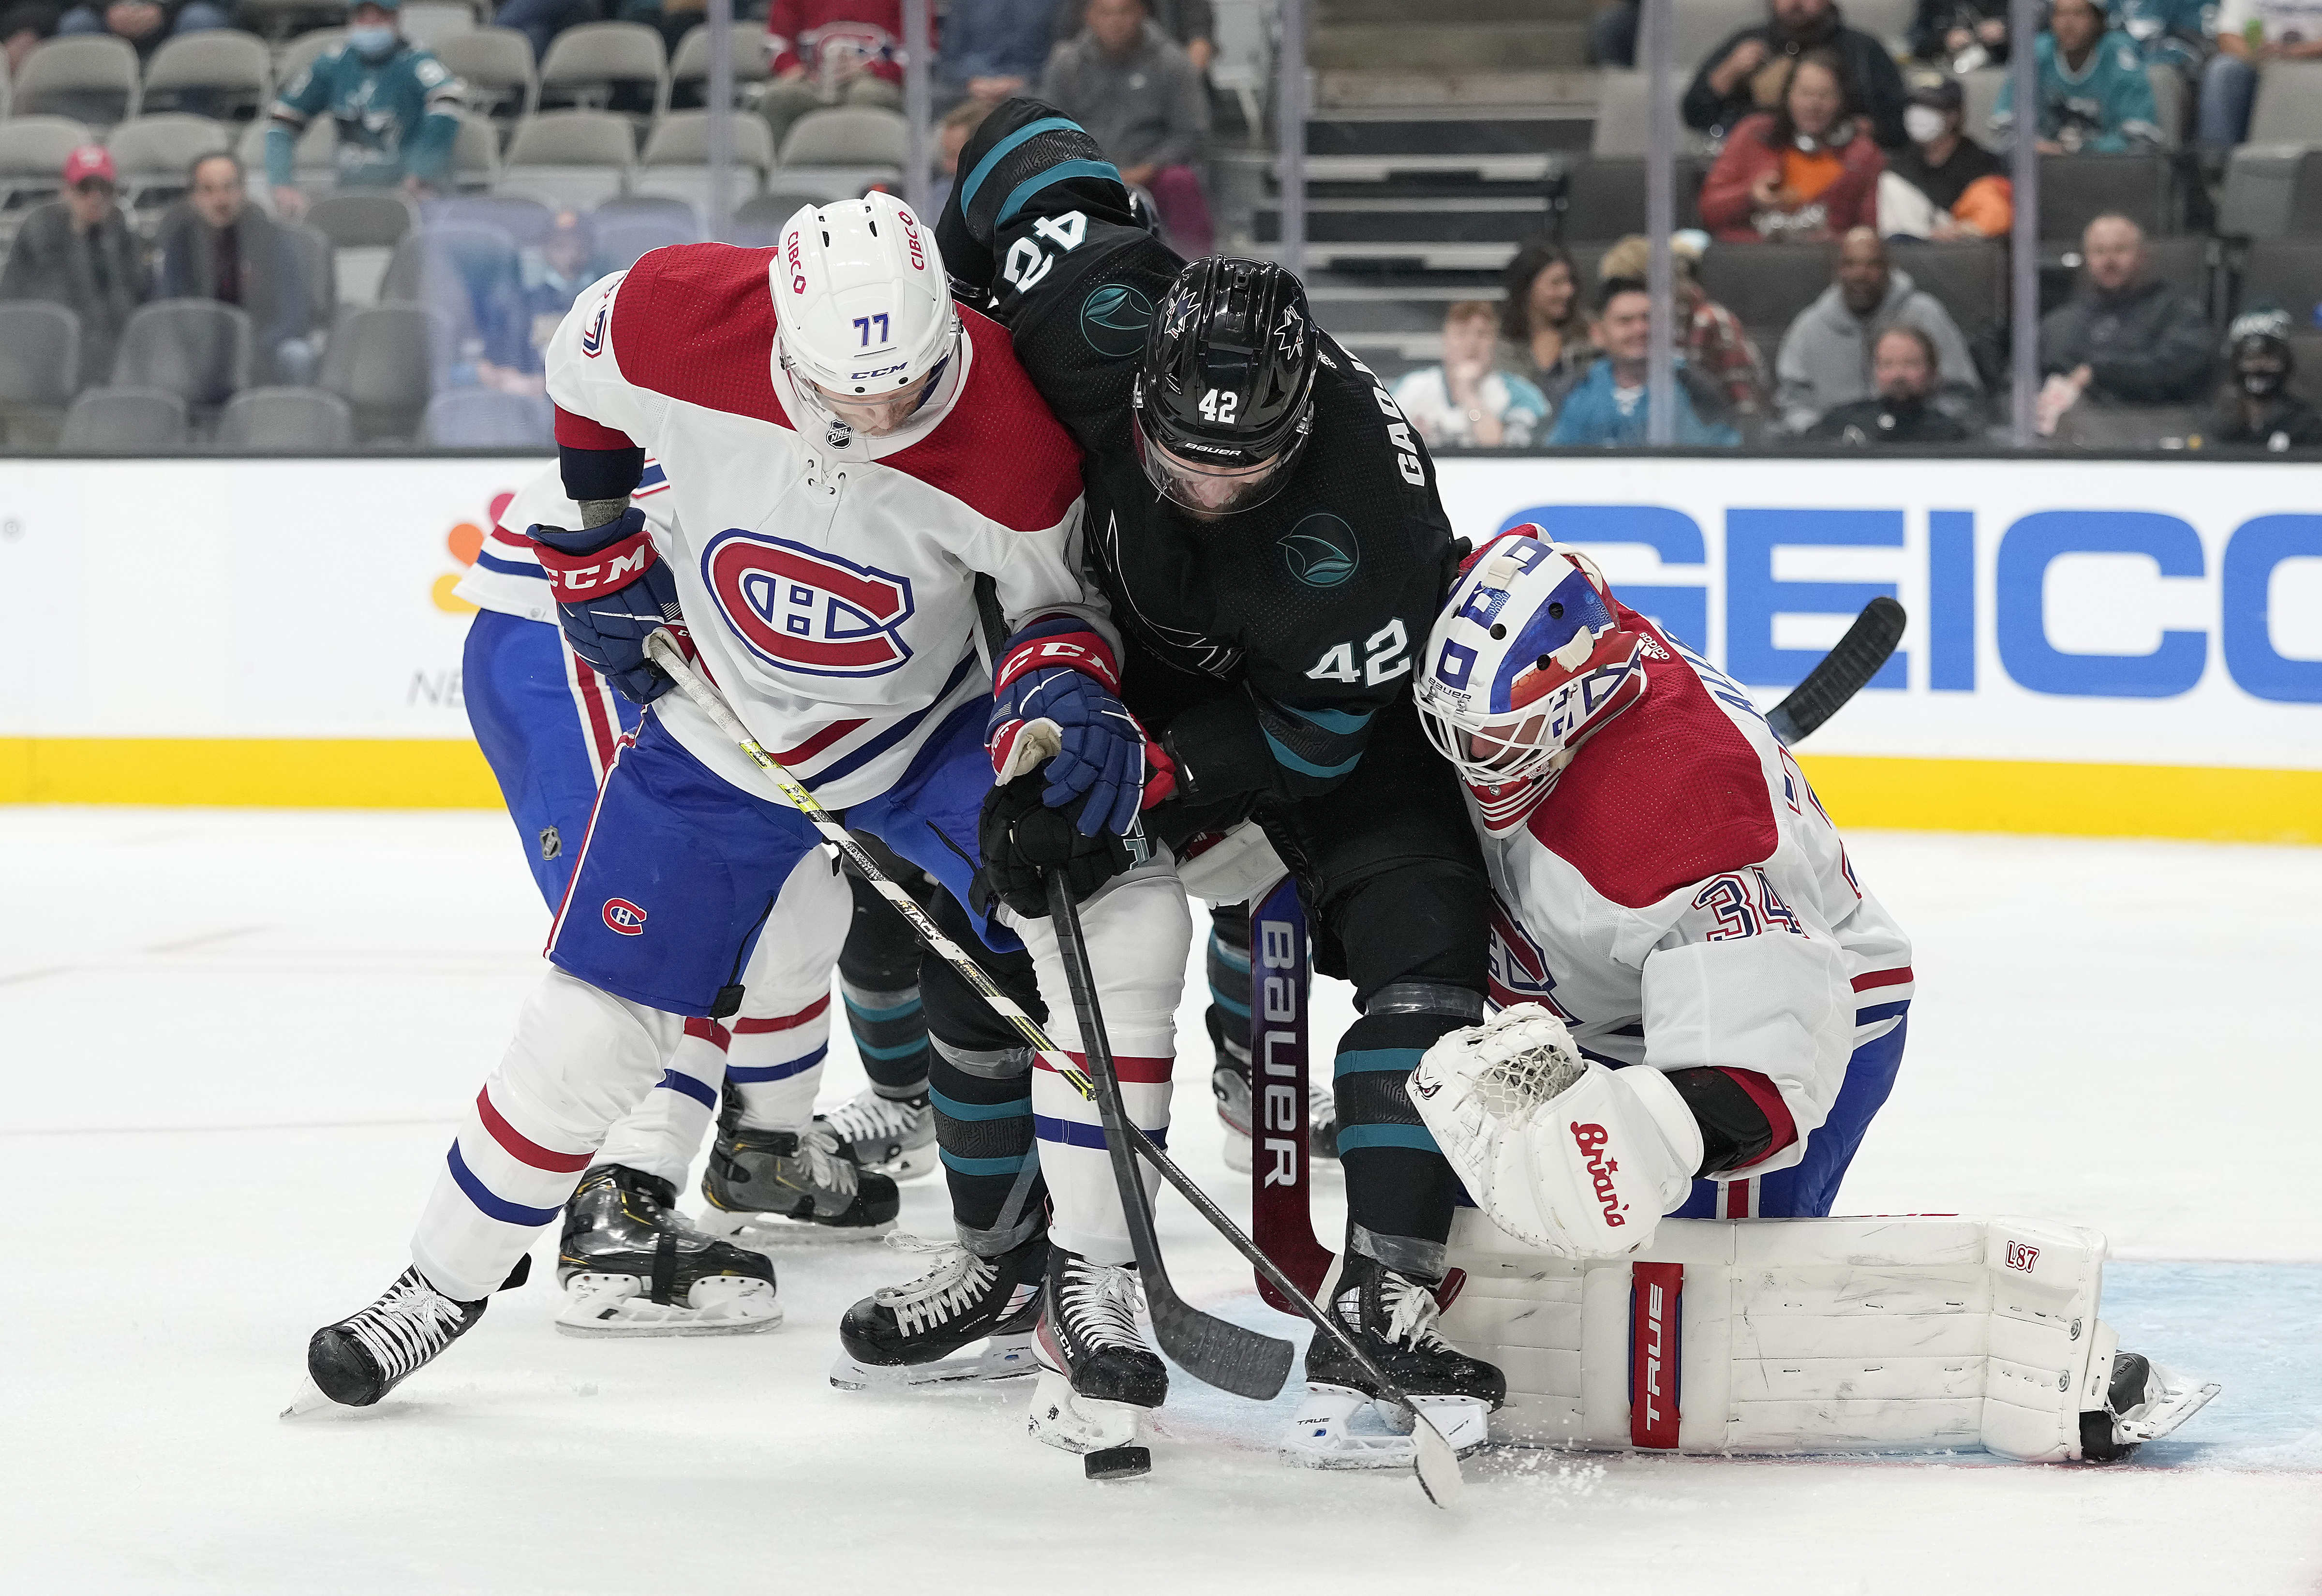 Jonah Gadjovich #42 of the San Jose Sharks battles for control of the puck with Brett Kulak #77 and Jake Allen #34 of the Montreal Canadiens during the second period at SAP Center on October 28, 2021 in San Jose, California.